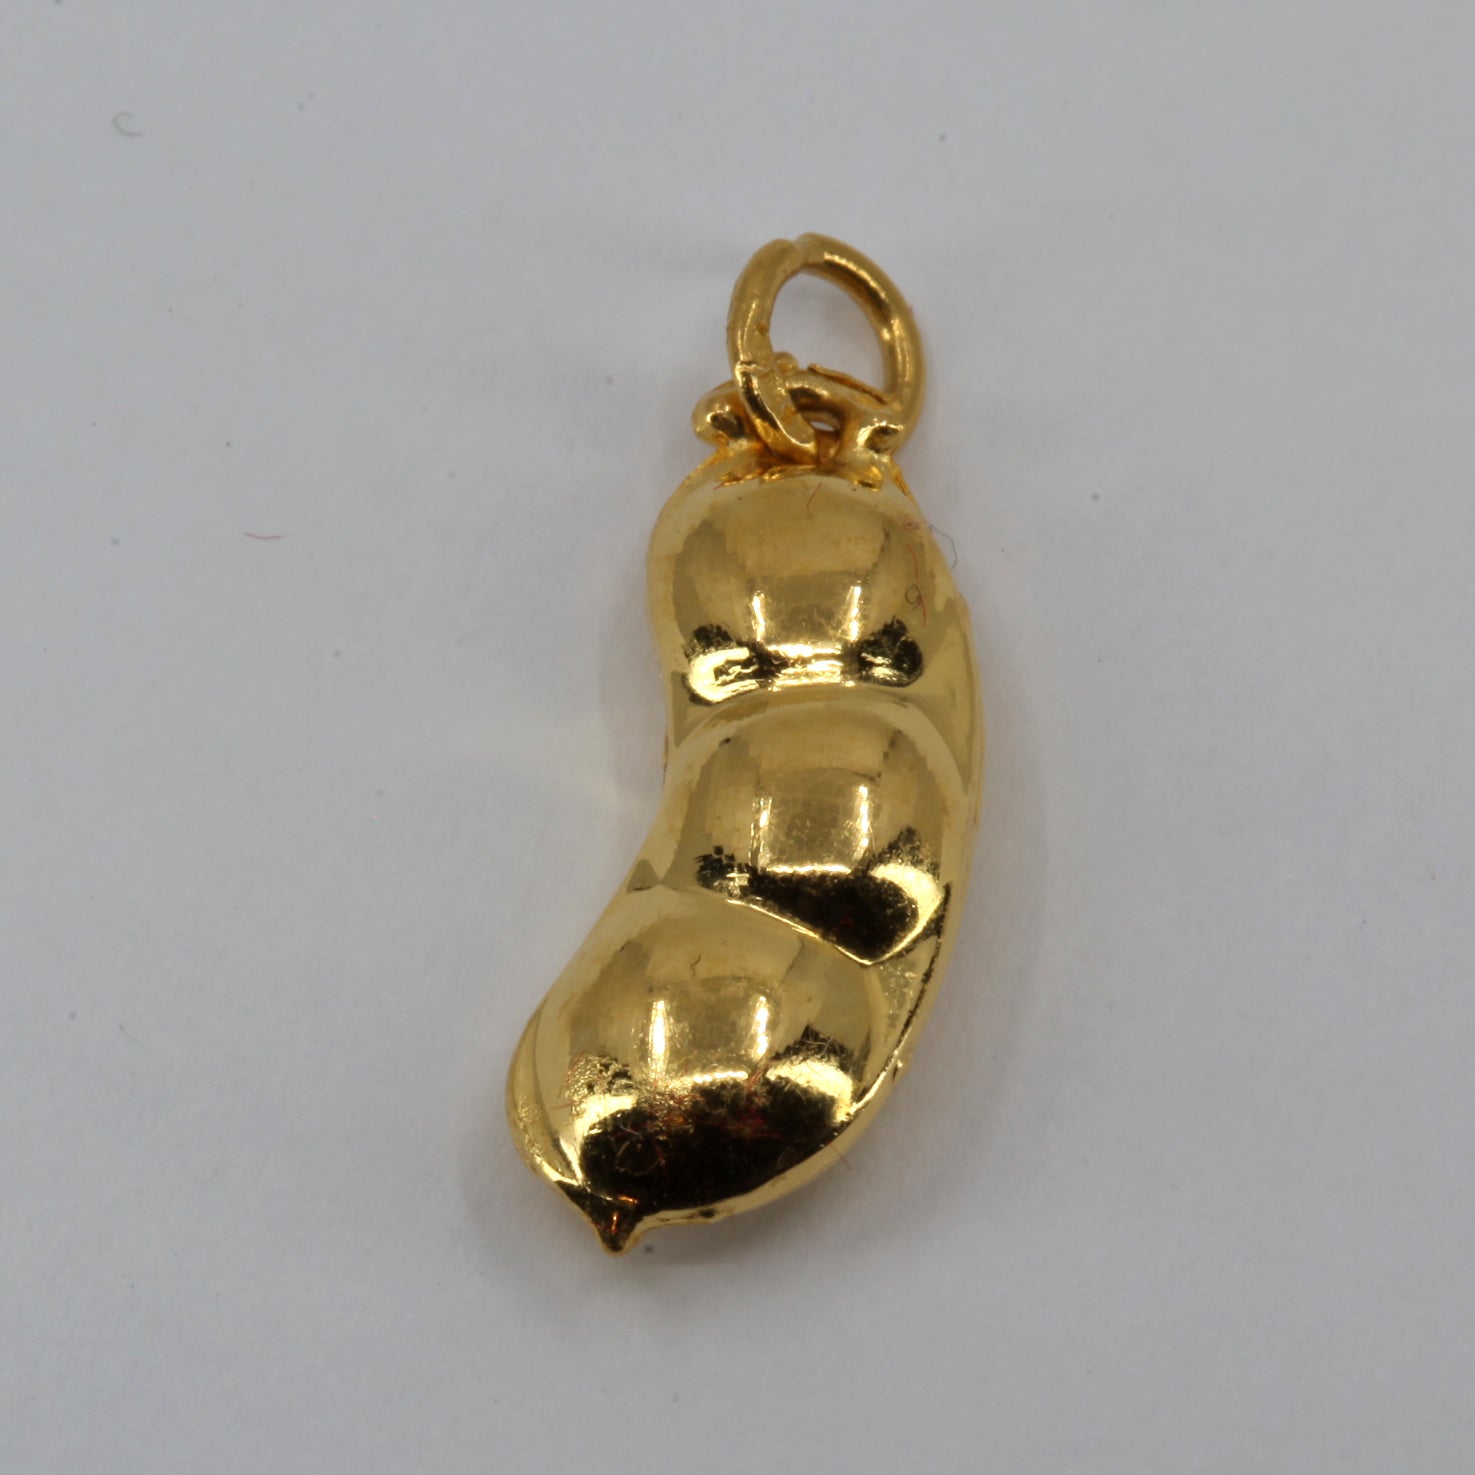 24K Solid Yellow Gold Puffy Pea Hollow Pendant 2.6 Grams